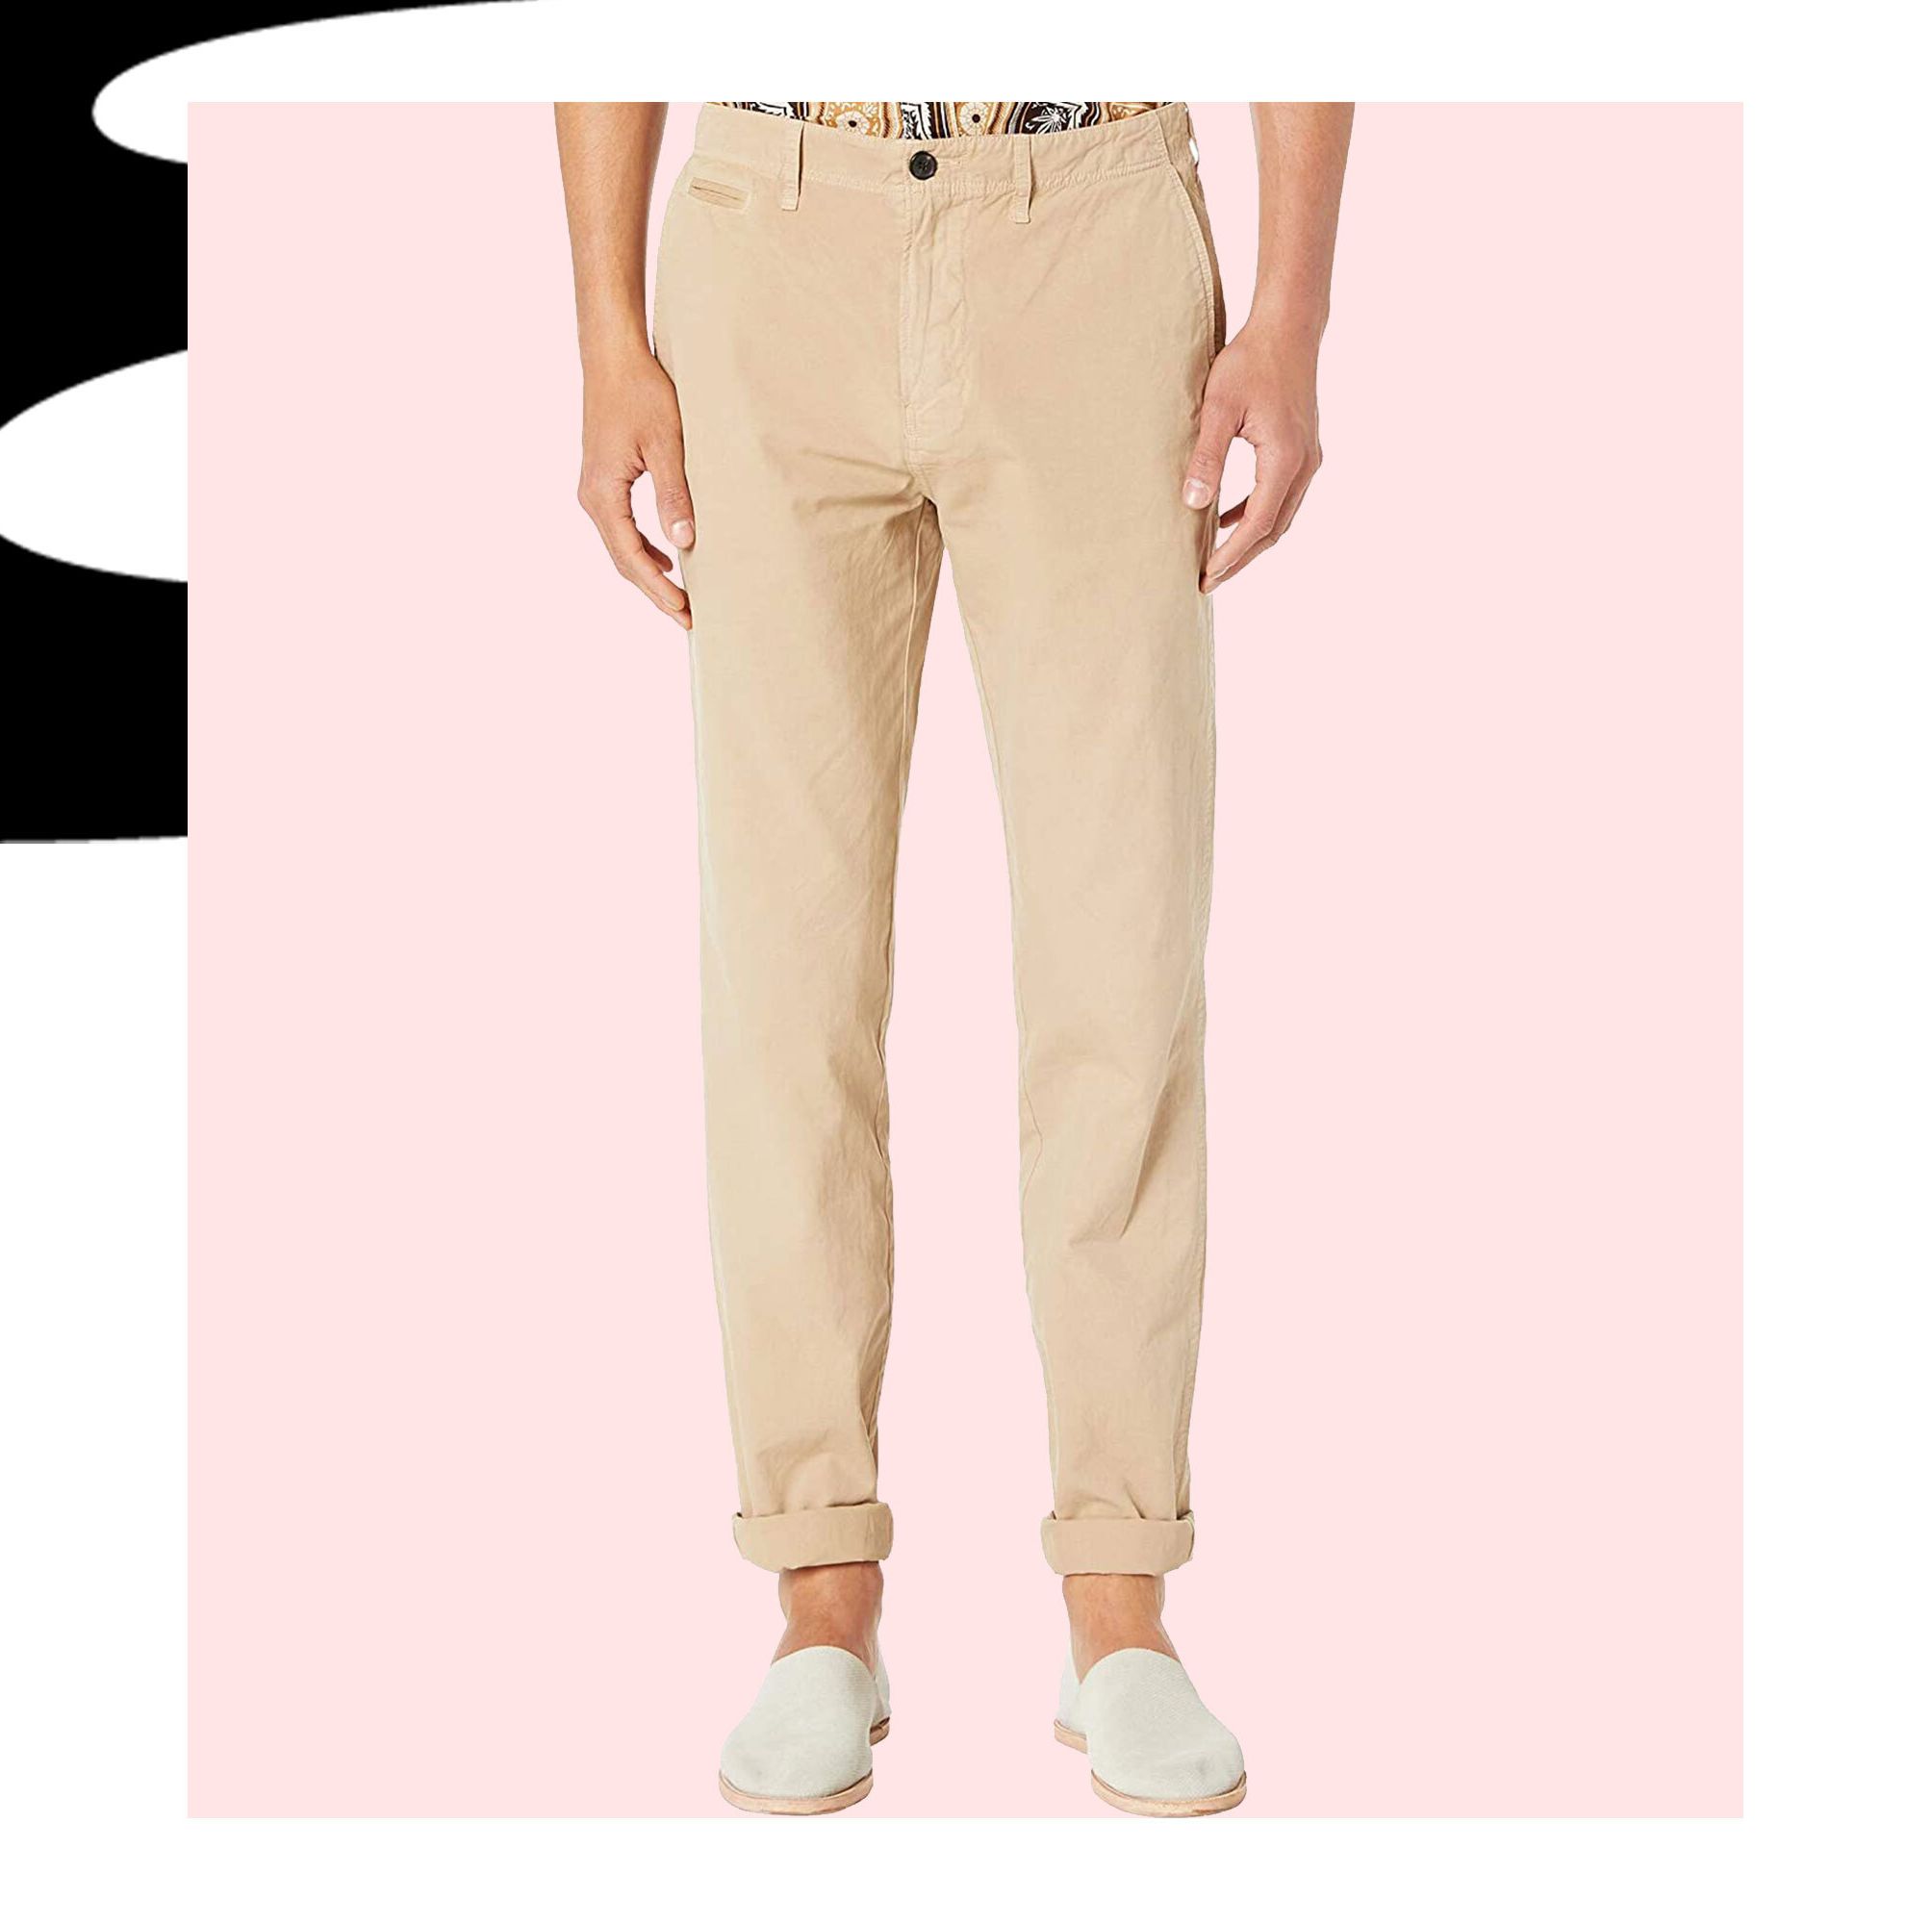 The Best Chinos on Amazon Cost Less Than $100